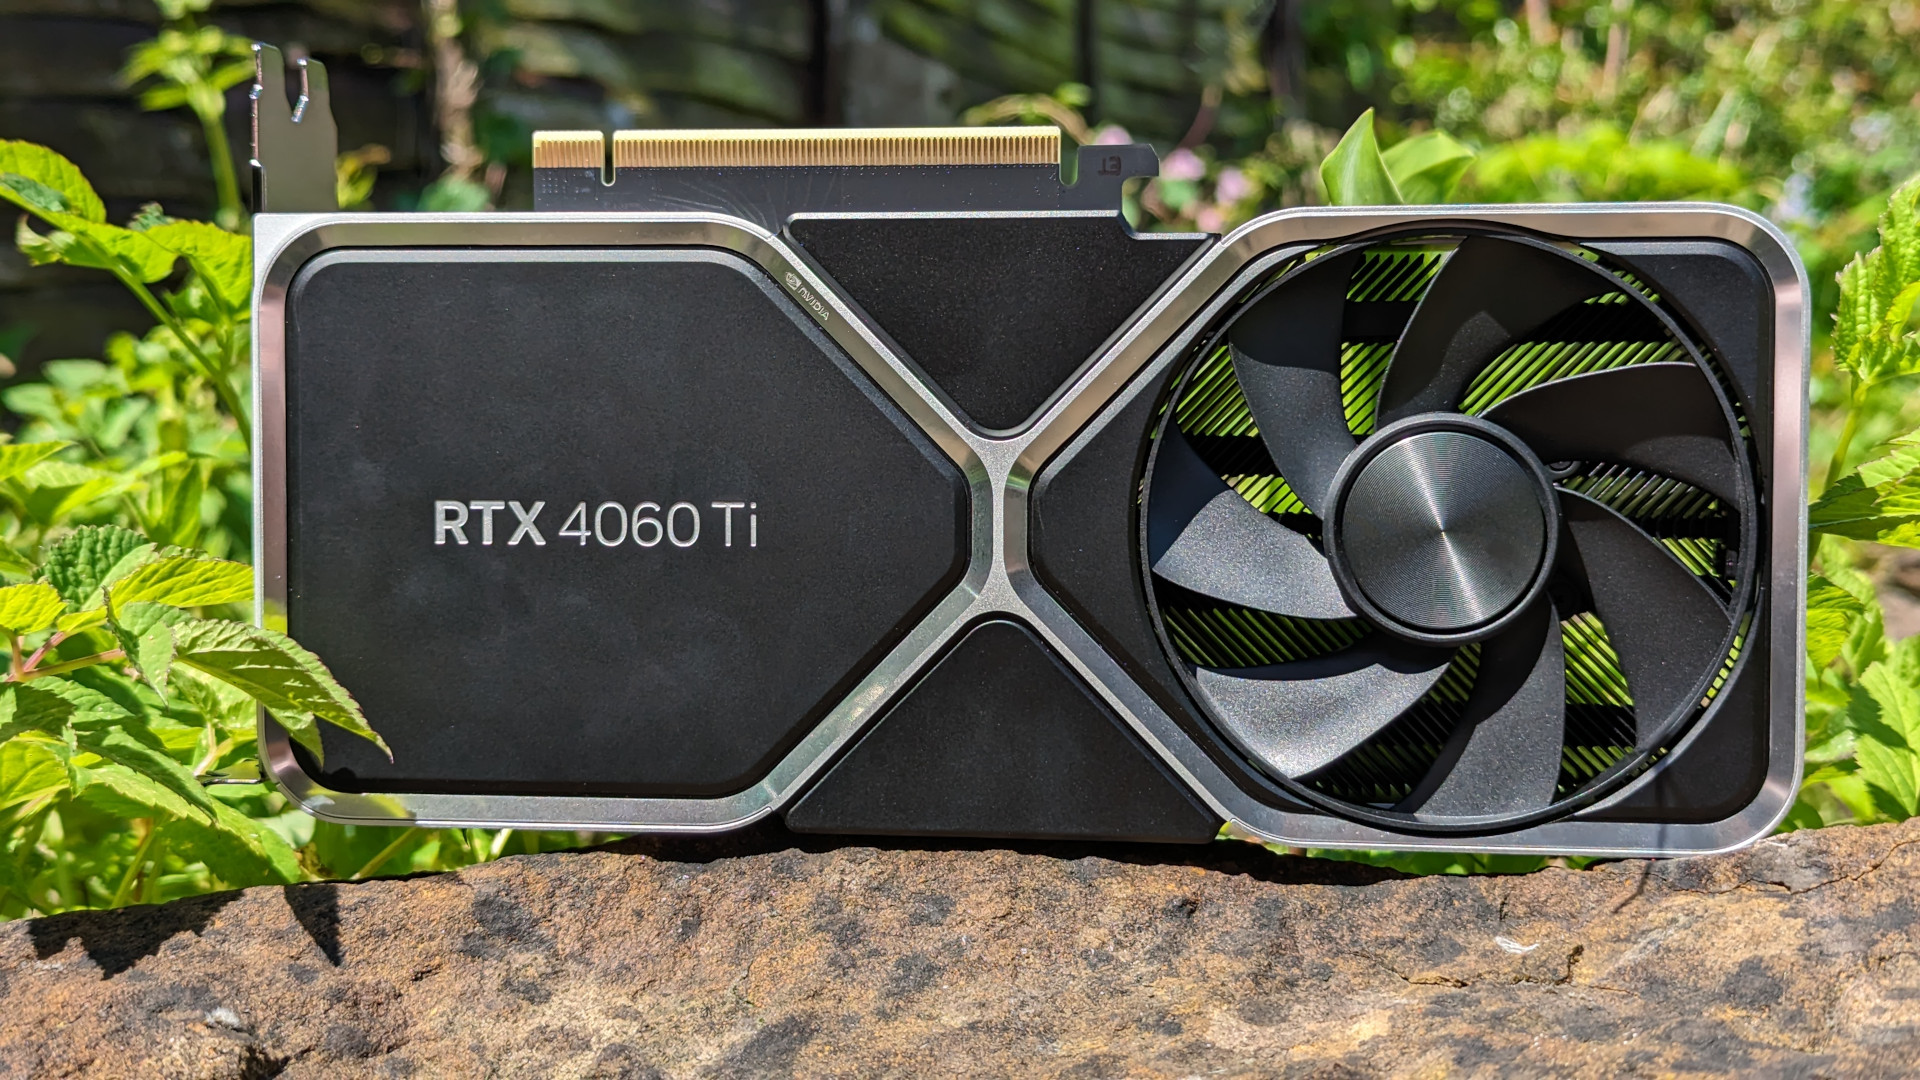 NVIDIA Confirms Founders Edition Only for RTX 4060 Ti 8 GB